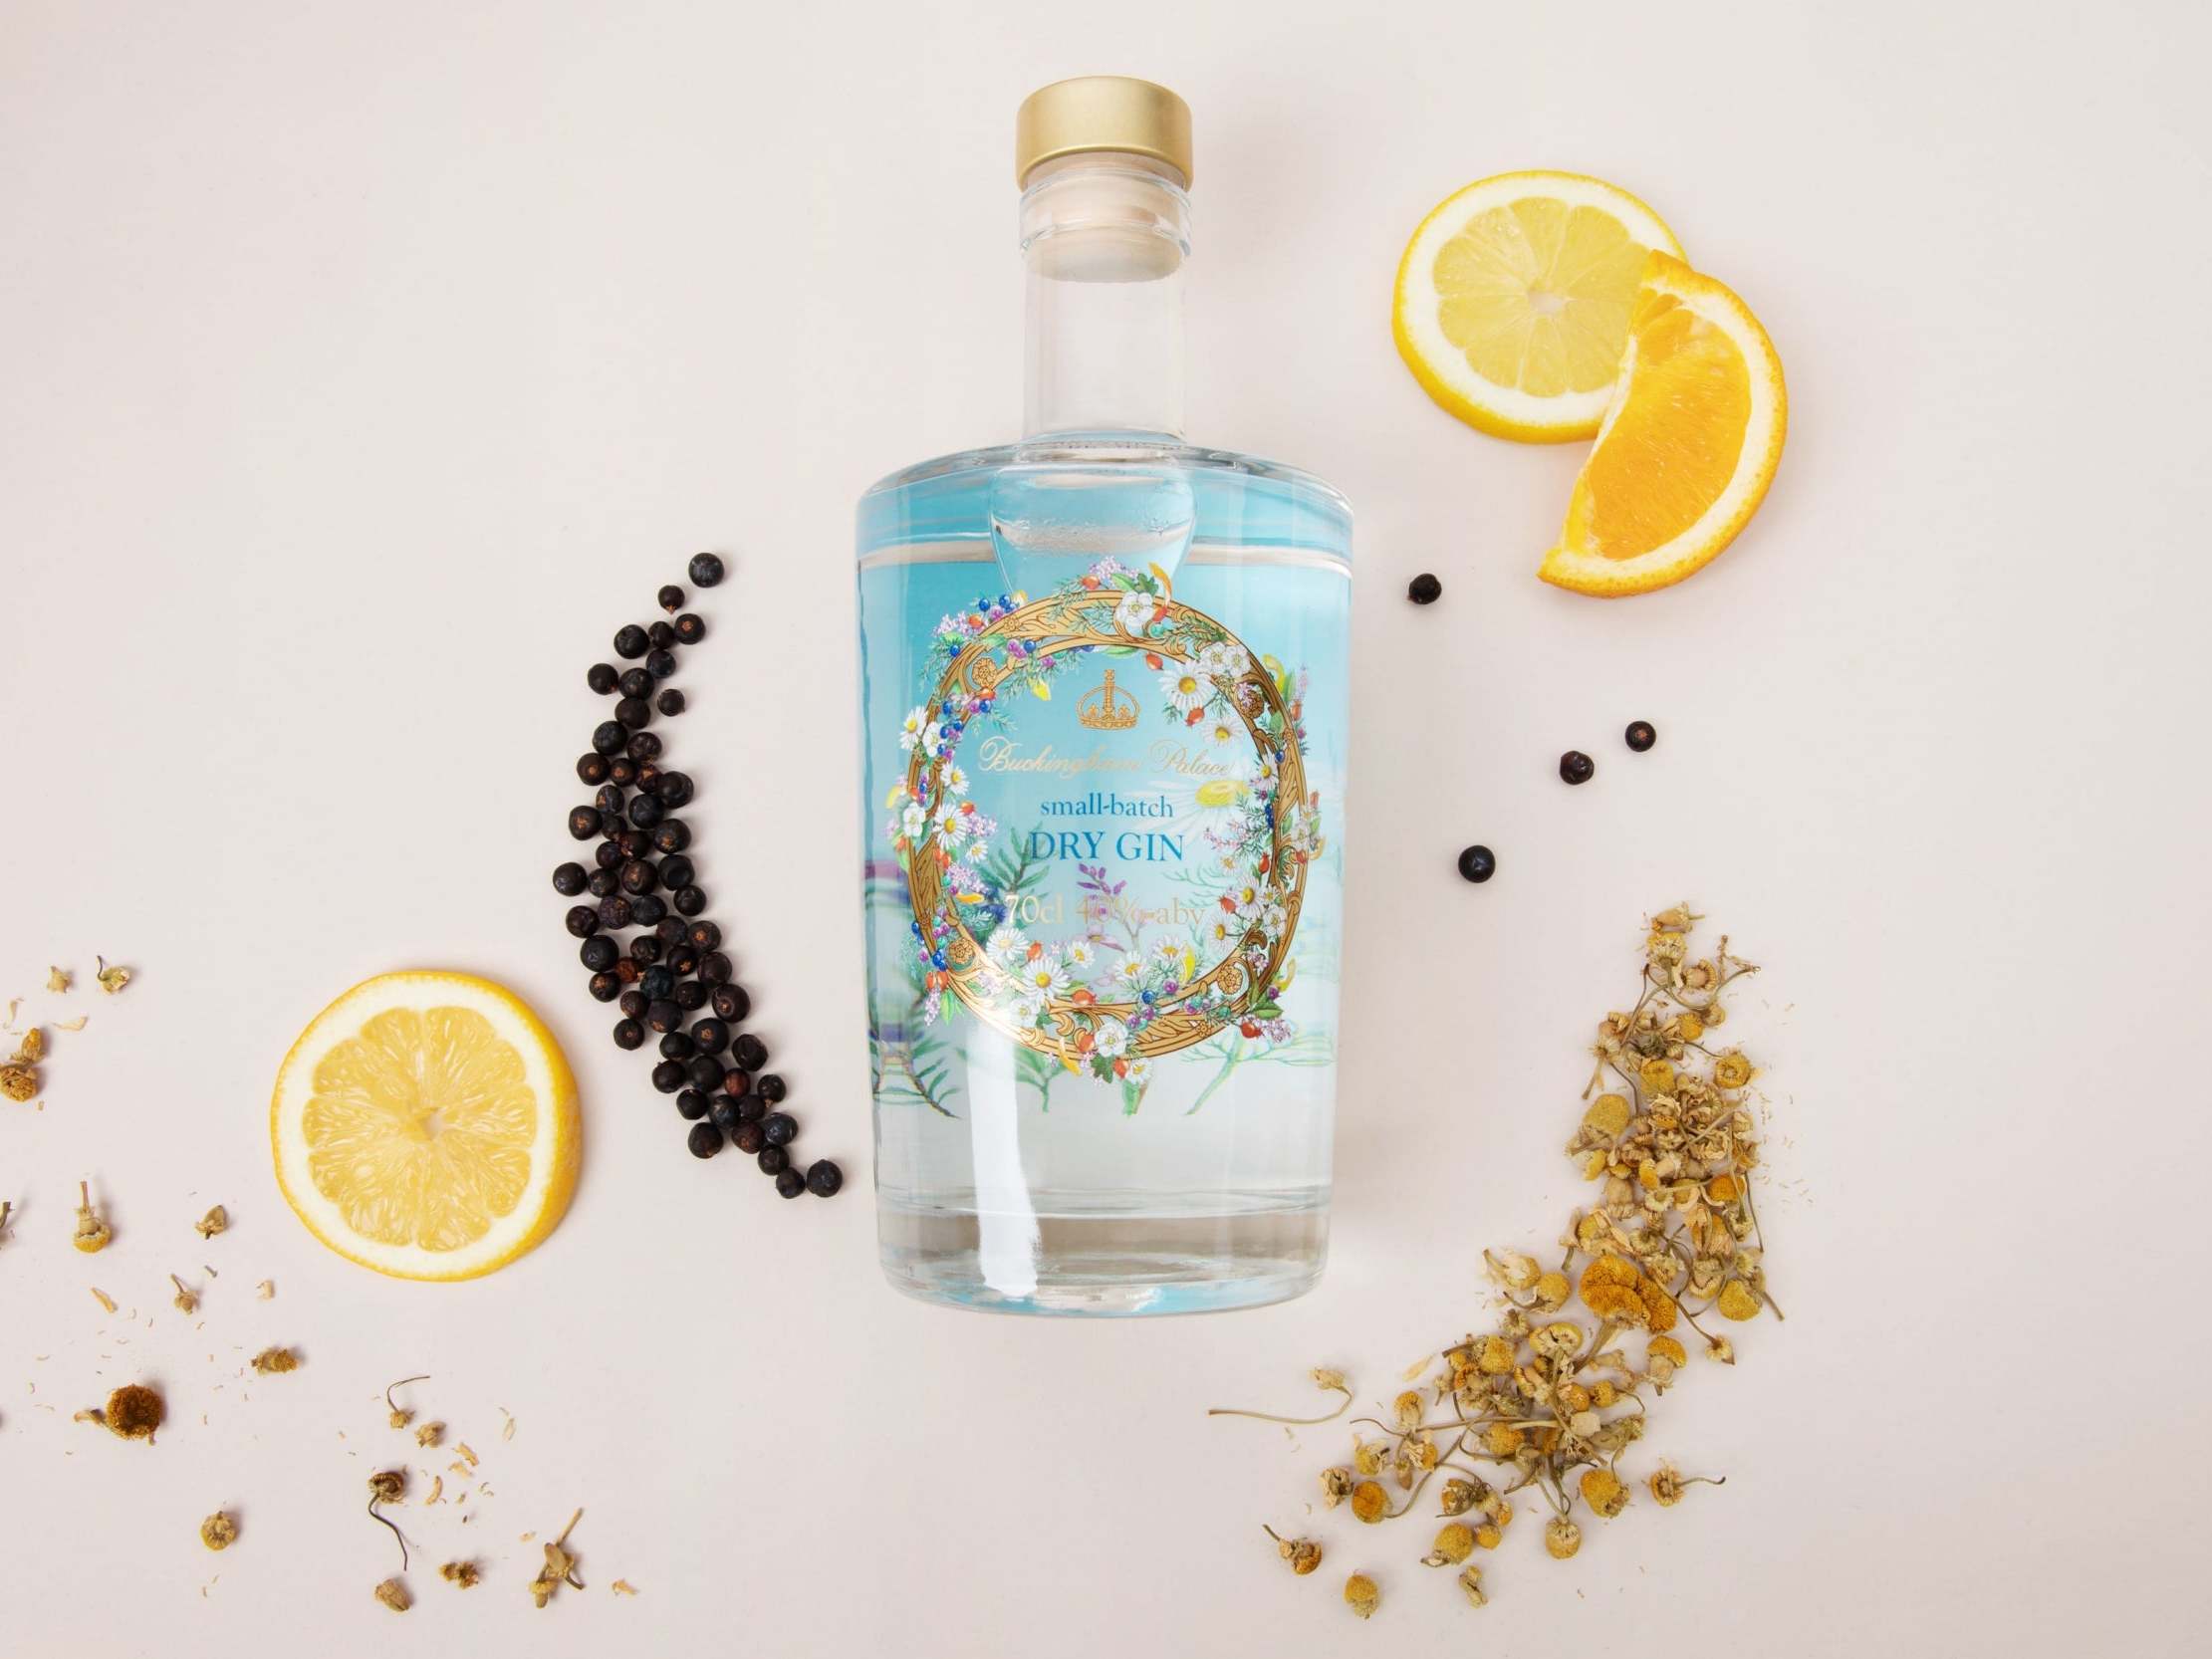 Buckingham Palace gin: If you couldn't get one, buy these instead